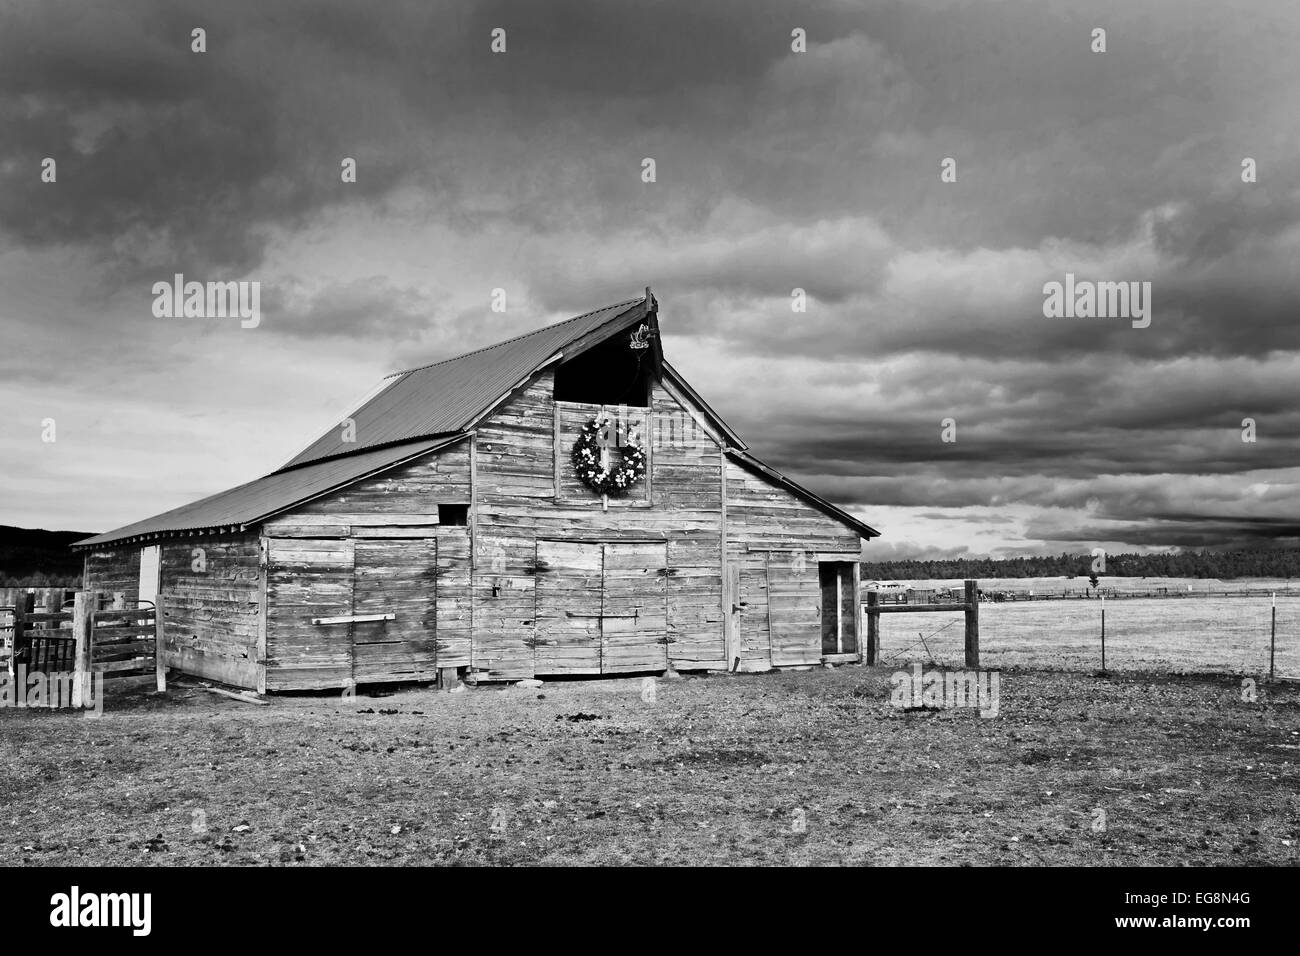 An old wooden barn in central Oregon Stock Photo